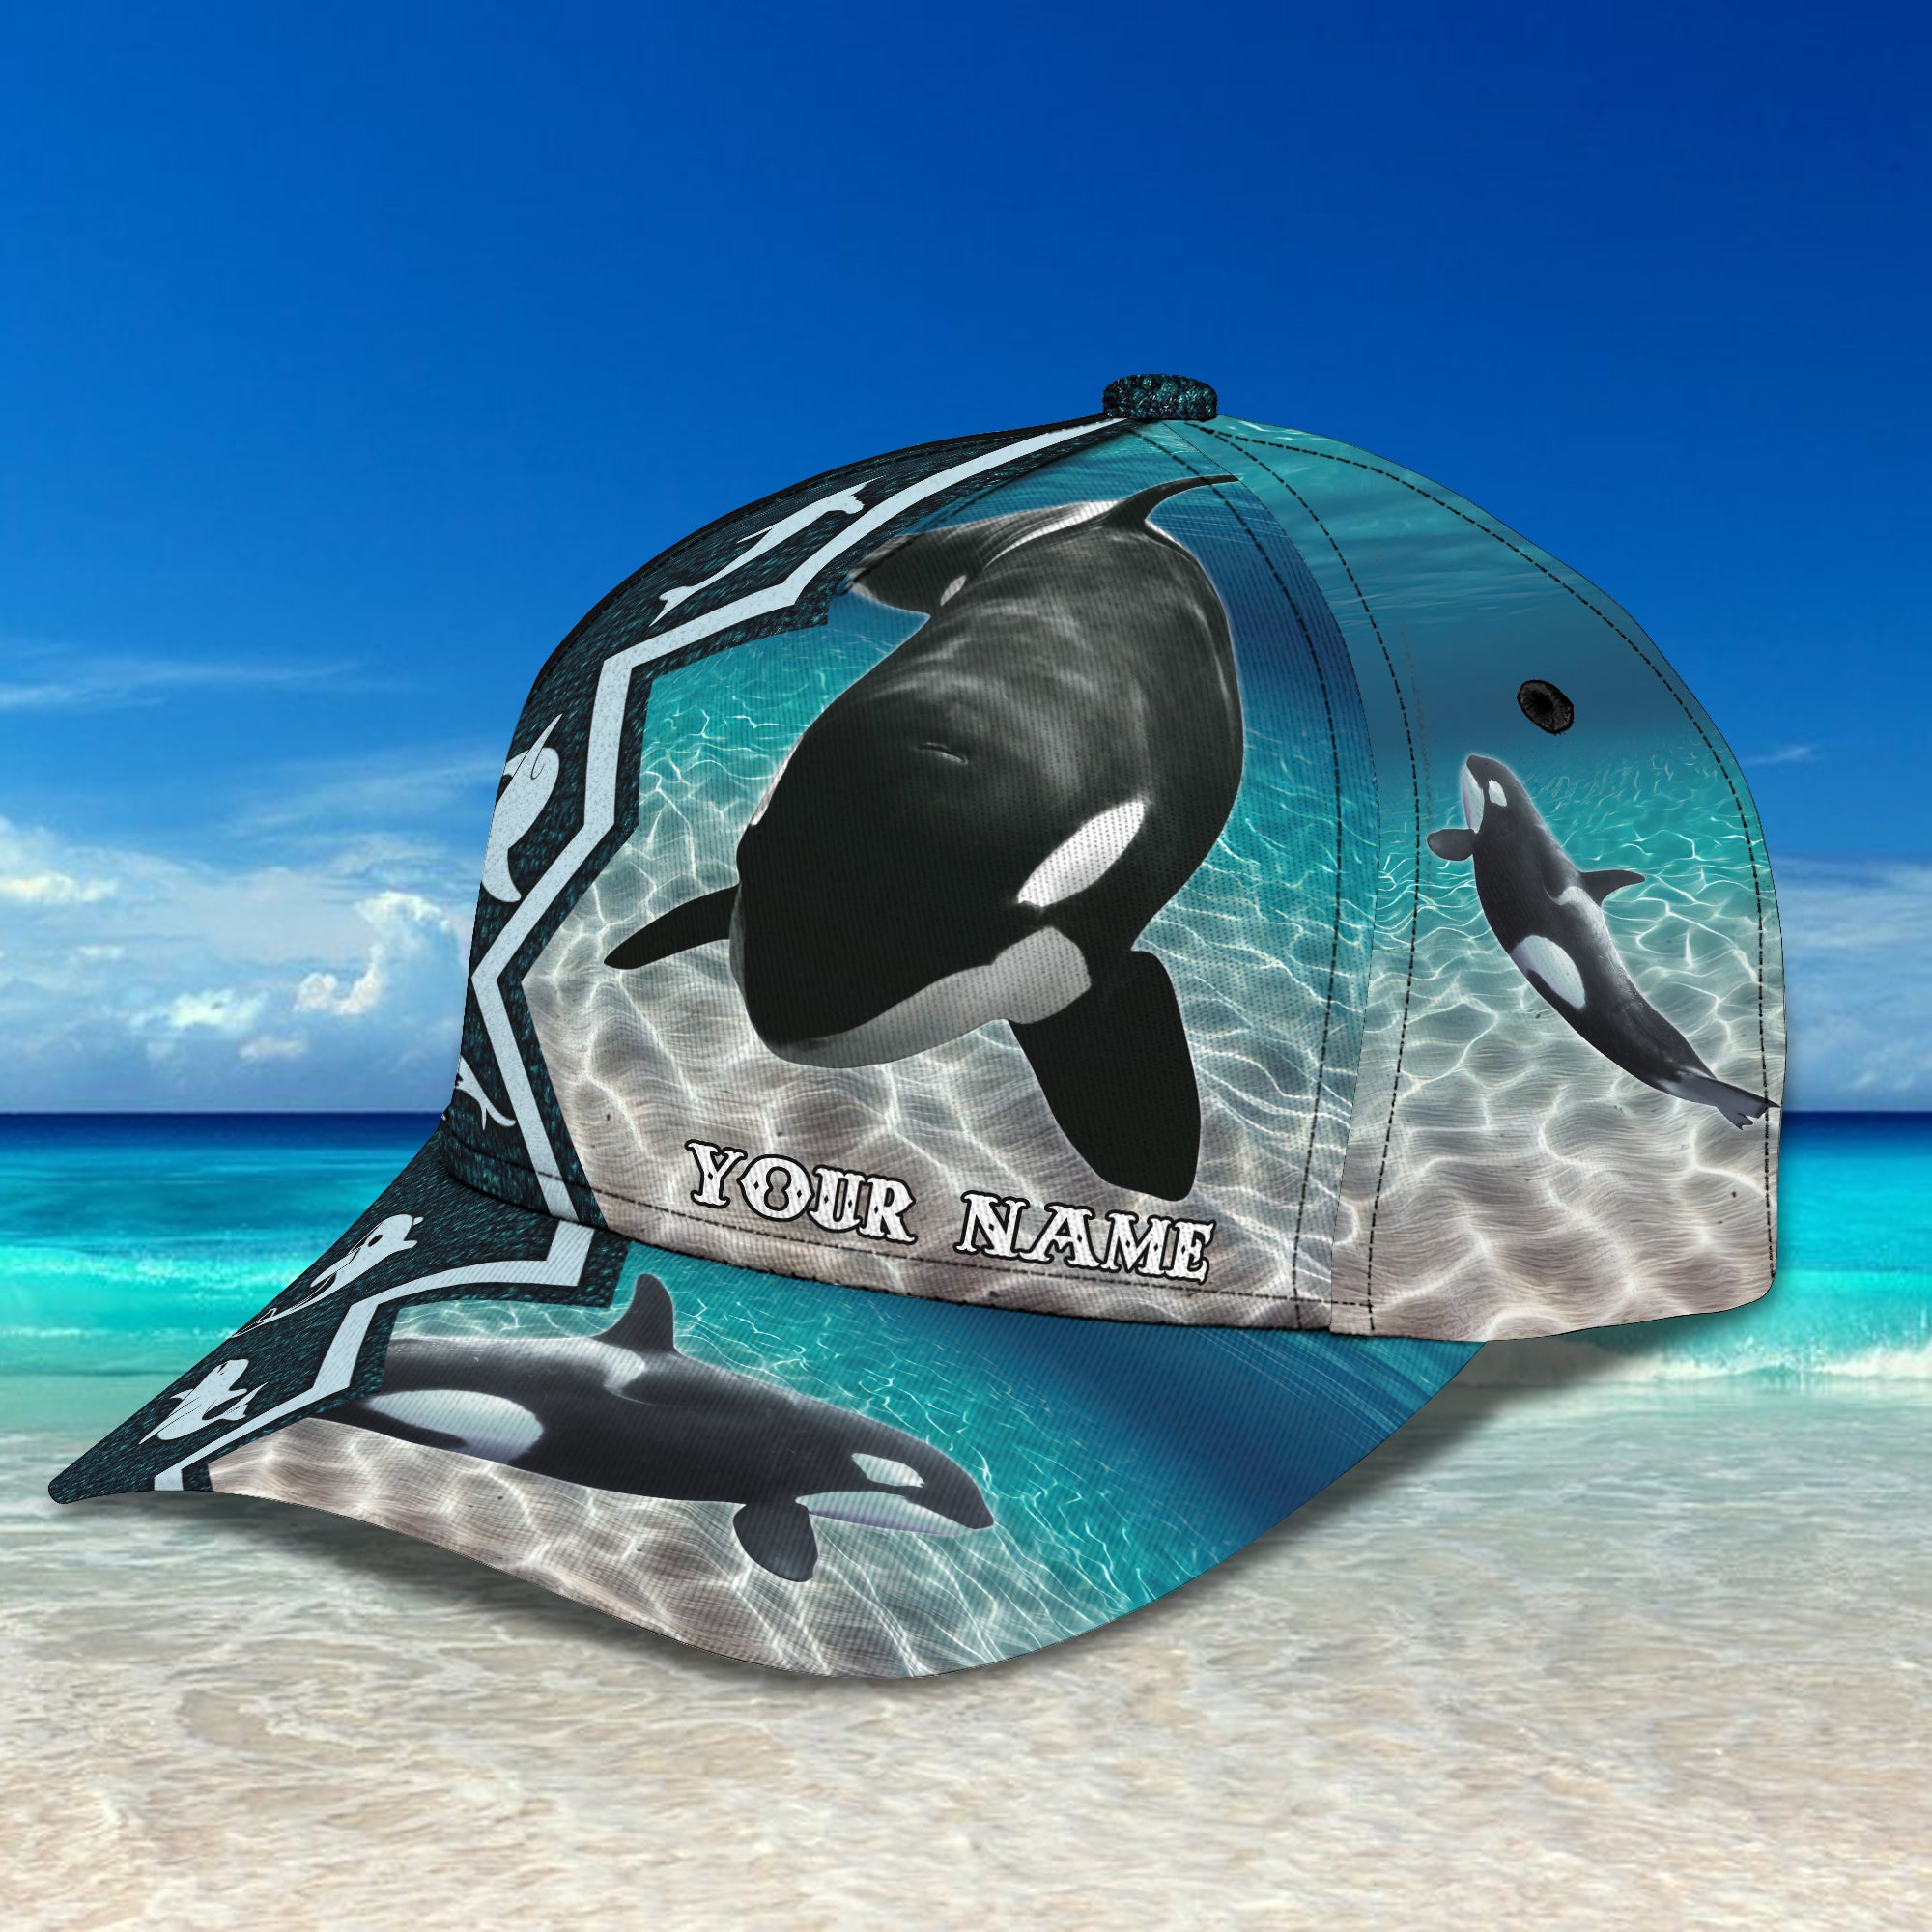 Killer Whale - Personalized Name Cap -Pth98